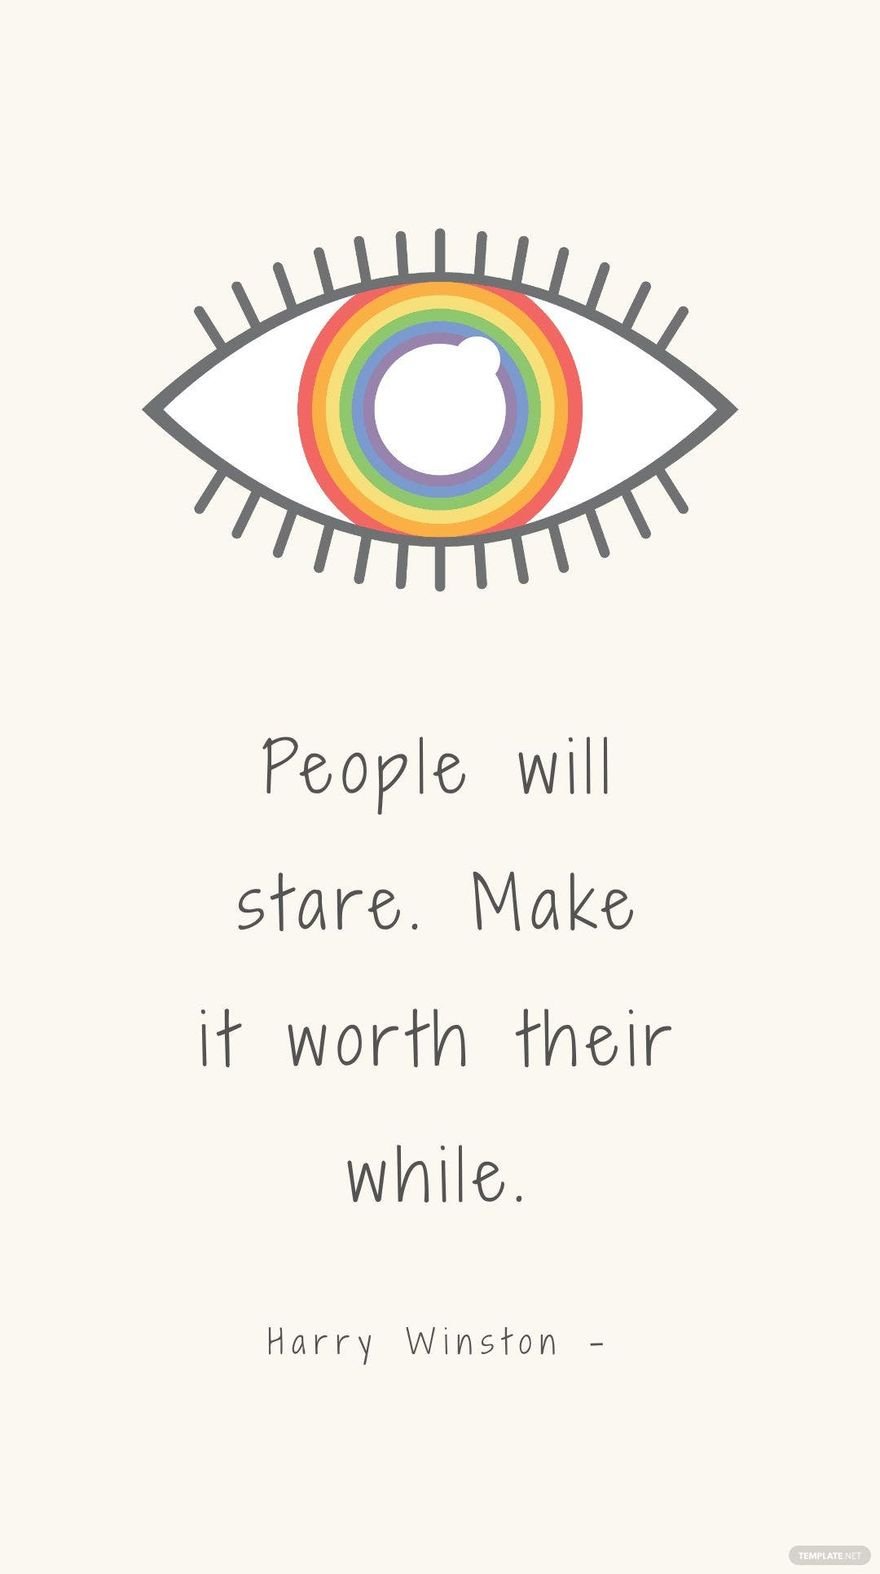 Harry Winston - People will stare. Make it worth their while.